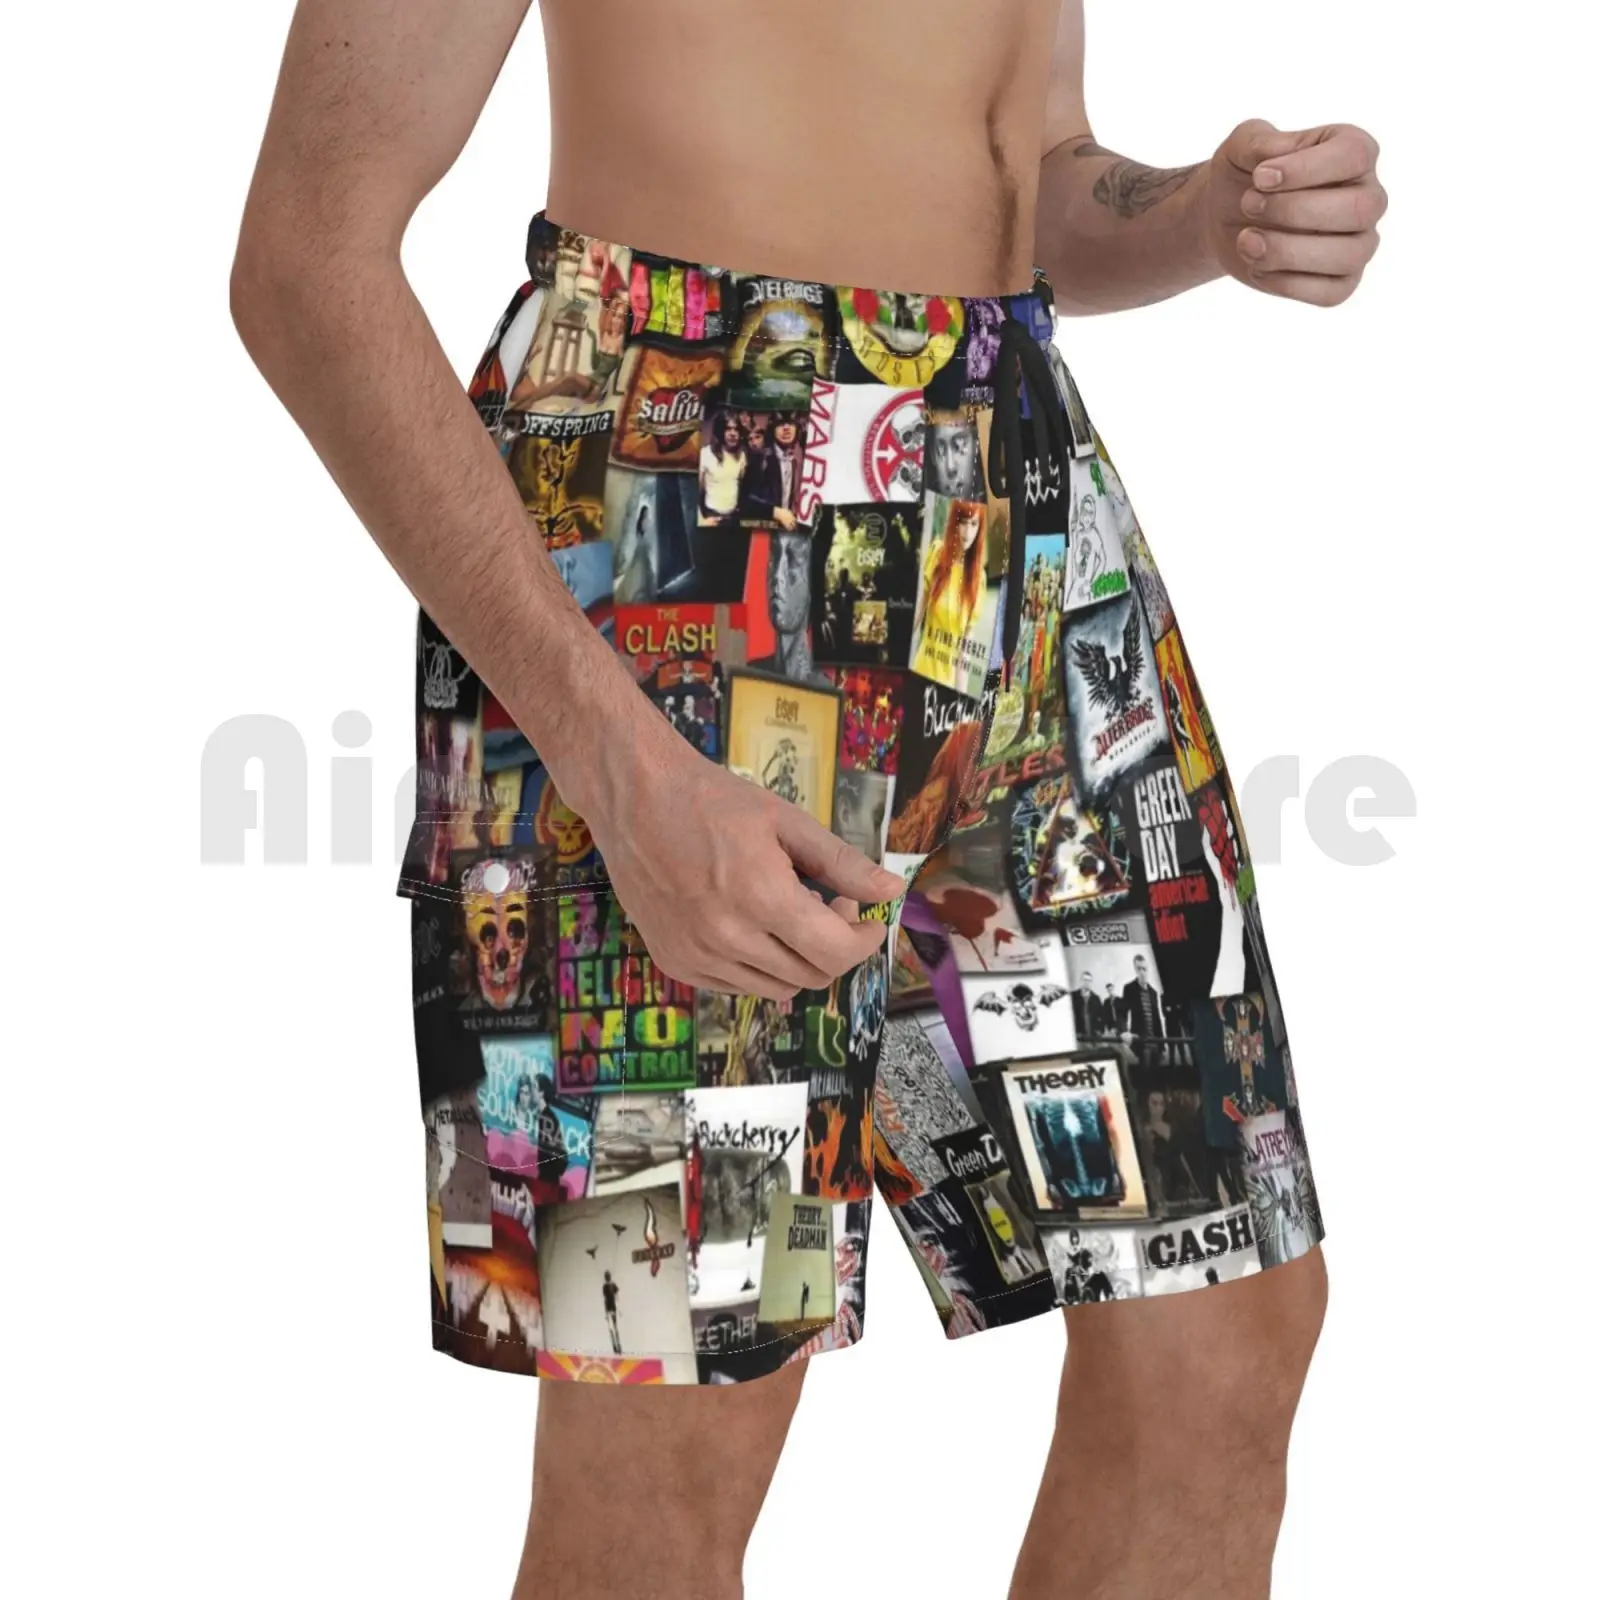 

In One Place Beach Shorts Men Beach Pants Swim Trunks Music Album Band Bands Collage Mix